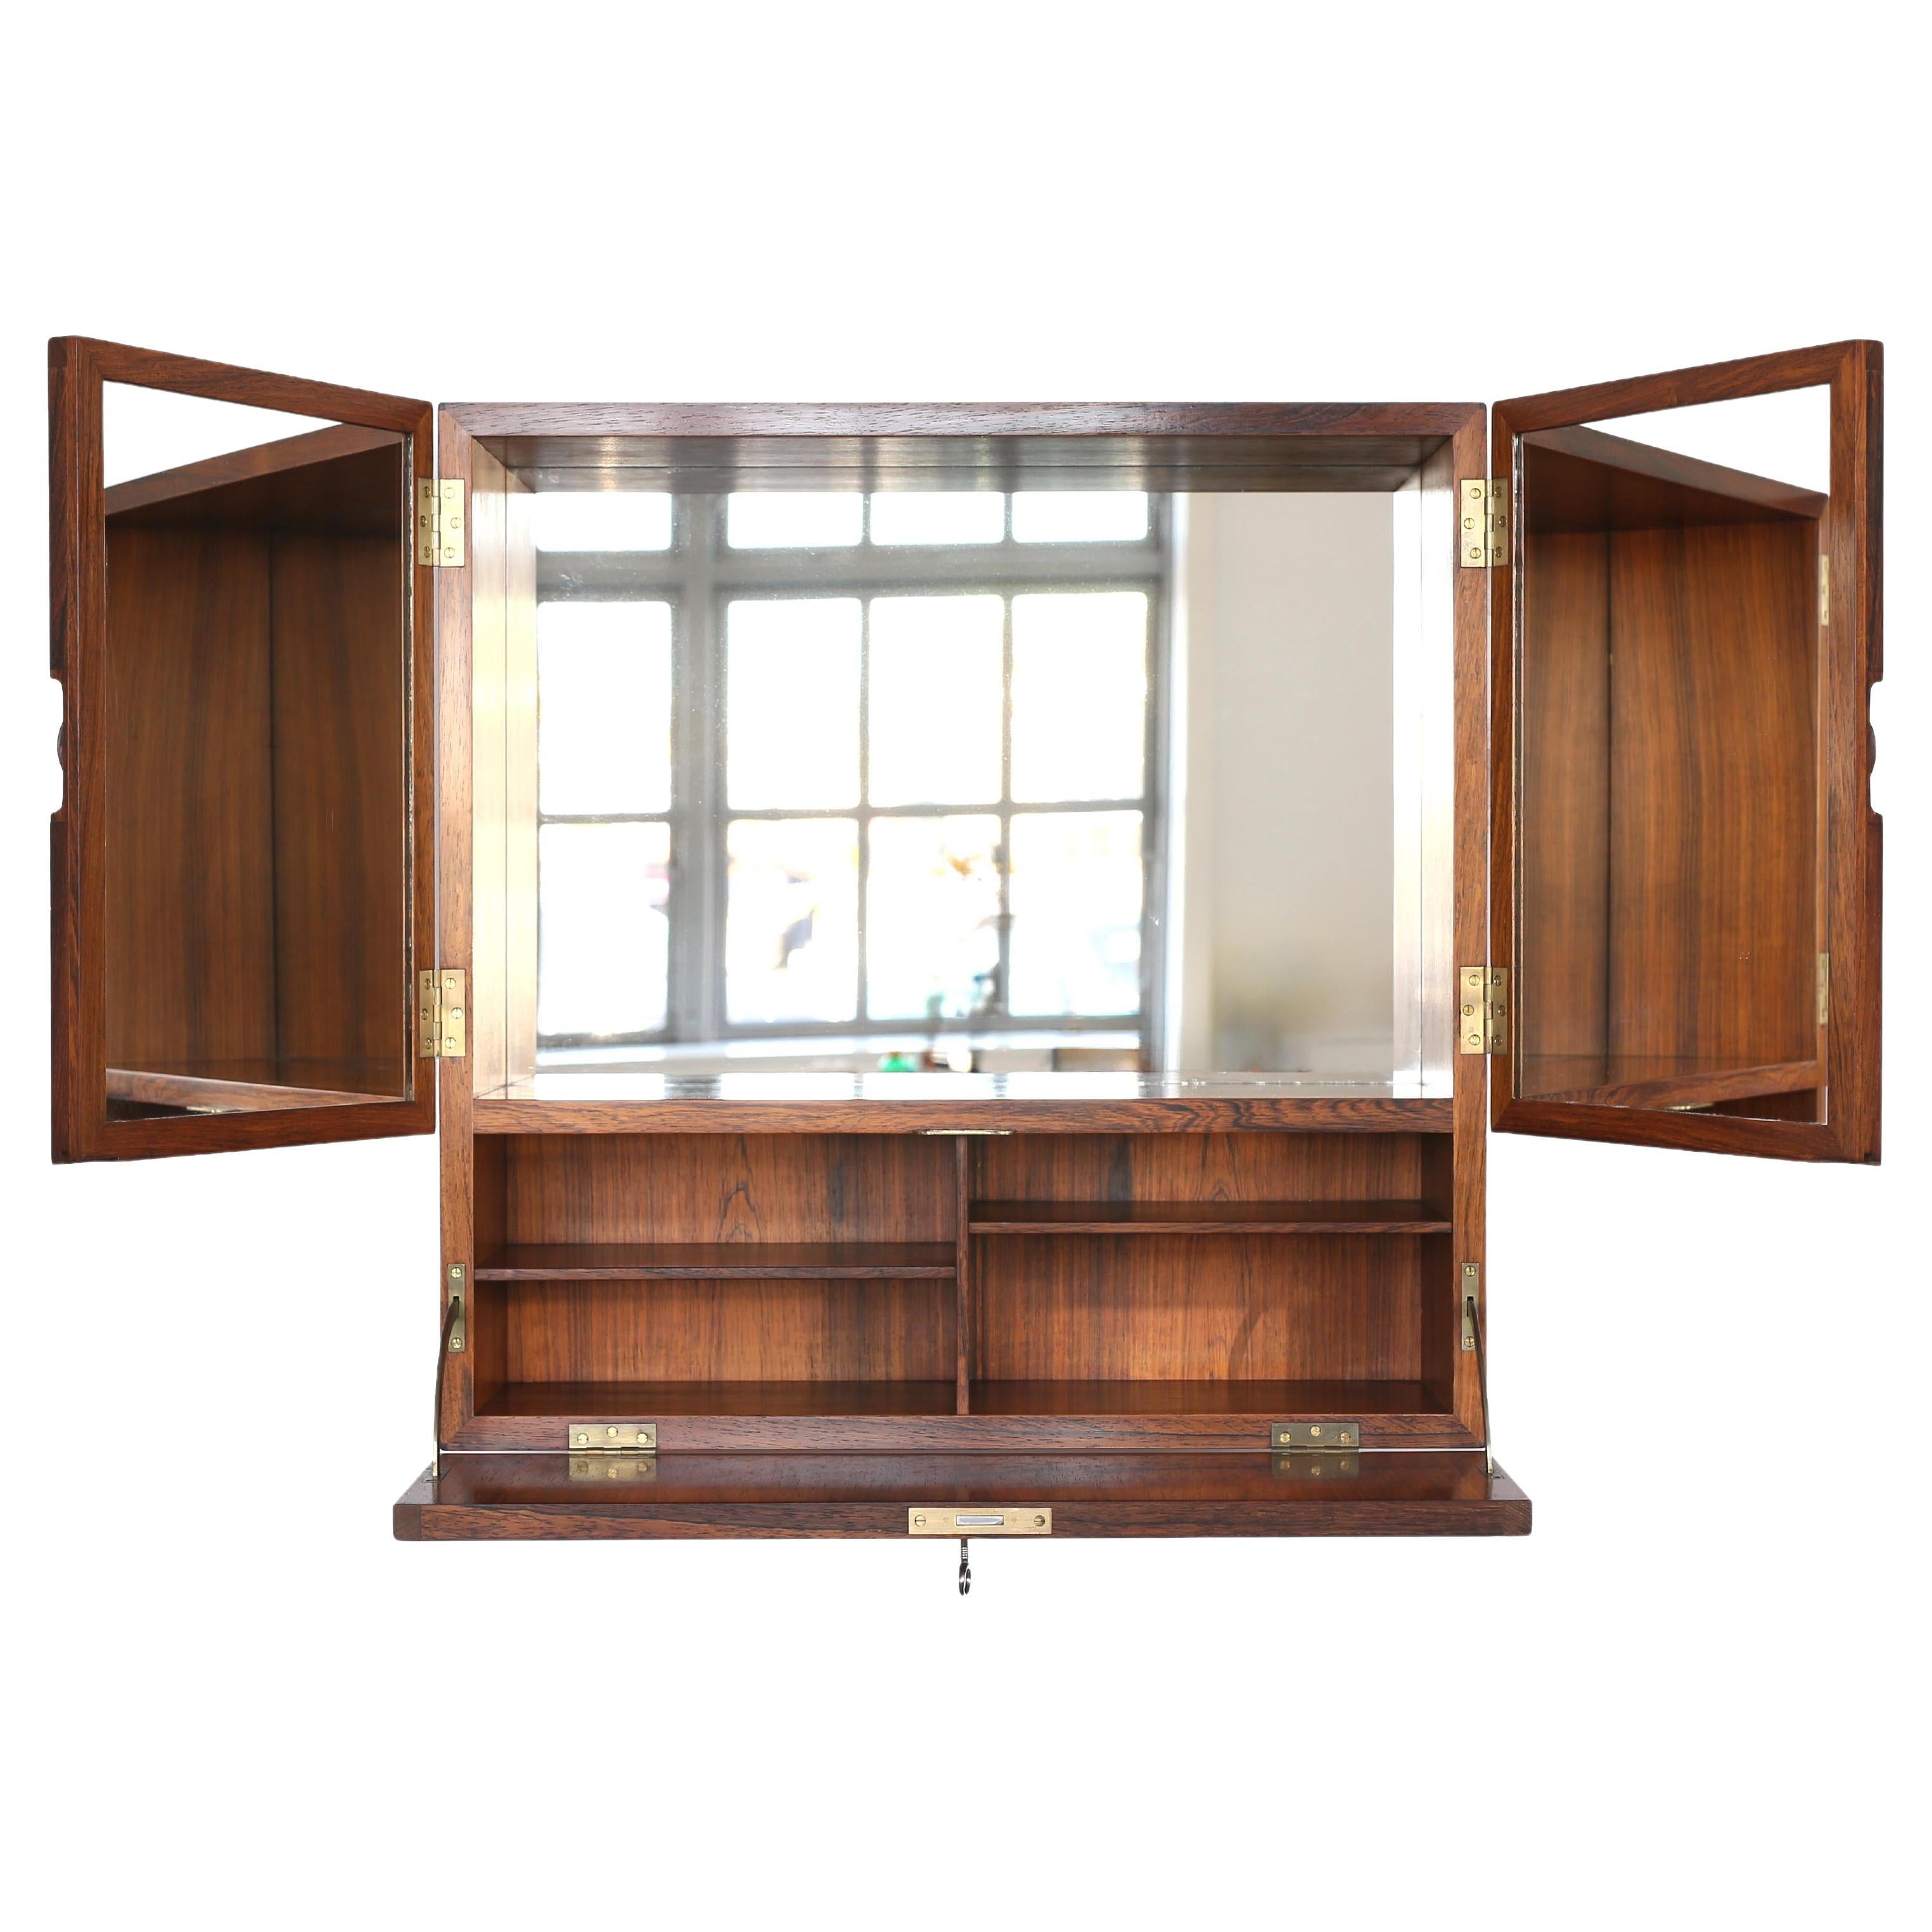 Tove & Edvard Kindt-Larsen 'Young Lady Wanted' cabinet in Rosewood, 1941 